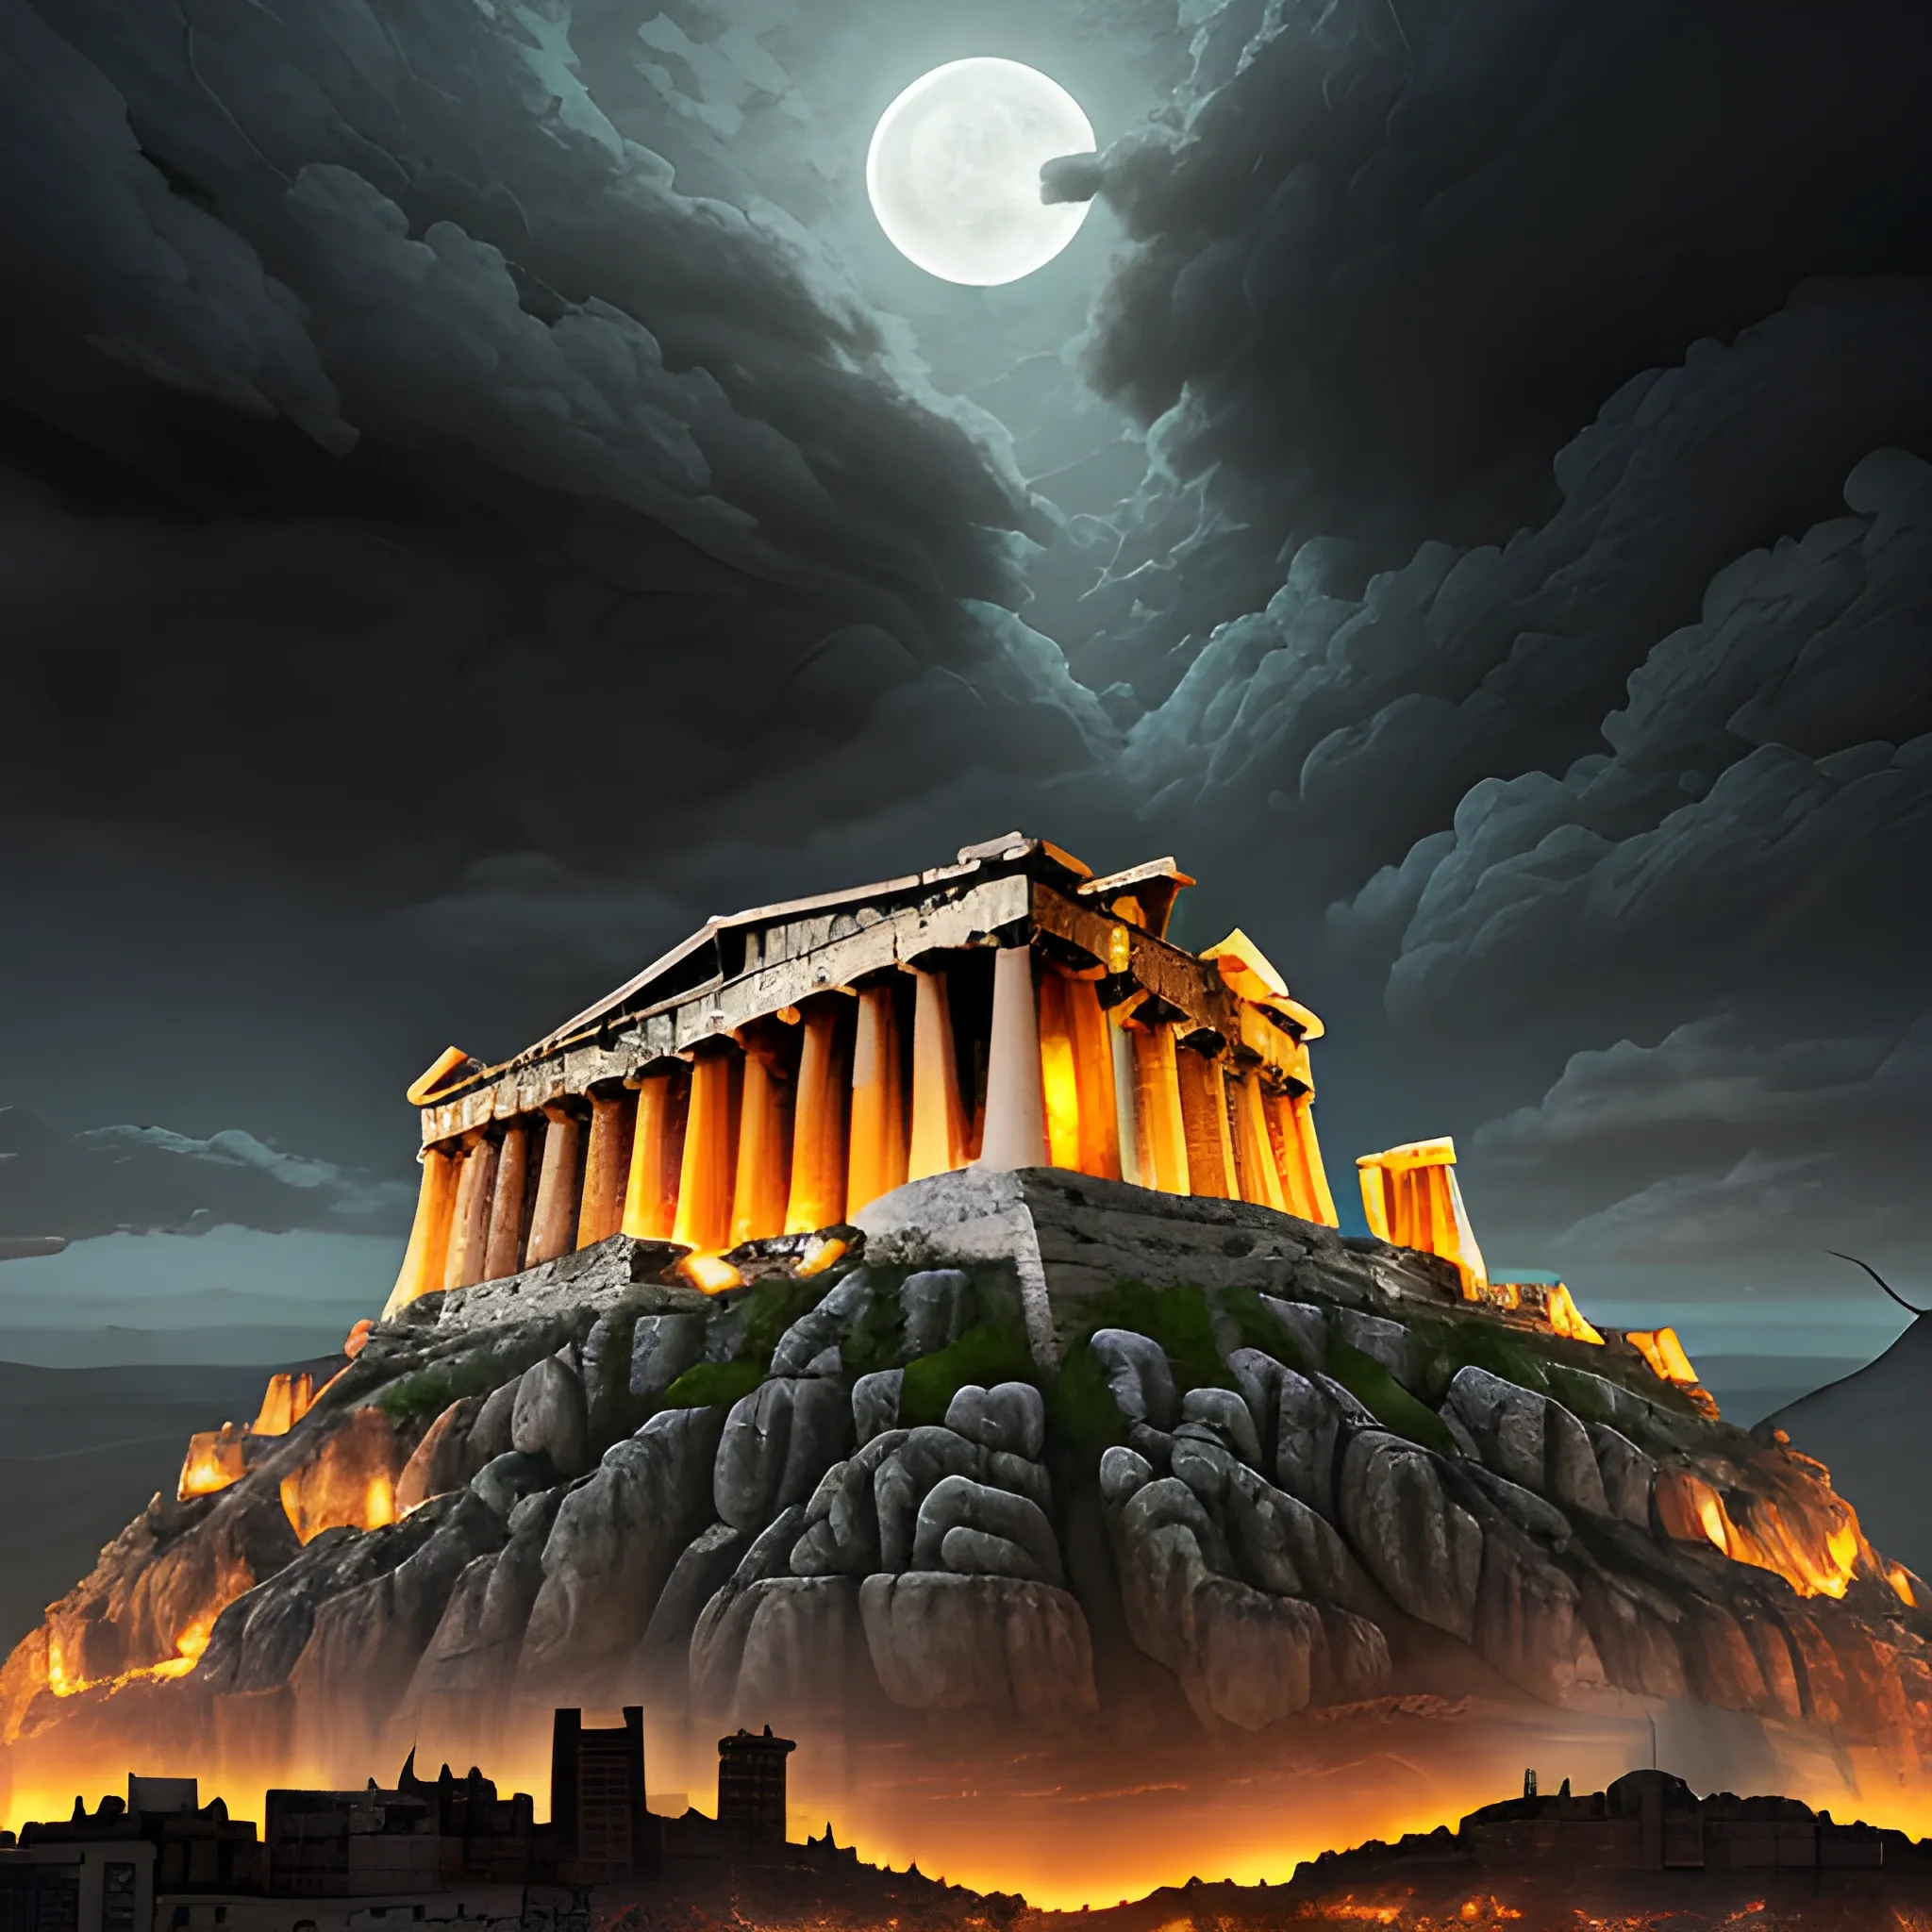 city of acropolis, on a high mountain, destroyed city, surrounded by clouds, dark environment, place of terror, dim lights, destruction, putrefaction, green, night, darkness, dead vegetation, moor, rotten fauna, terror, fear, dark lighting, terror, moon, darkness, ruins, destroyed, death ancient greece architectural details, detailed environment, hyper realistic, devil city, decay, rot, 8k details, wide angle, 3d, panoramic view, slasher style